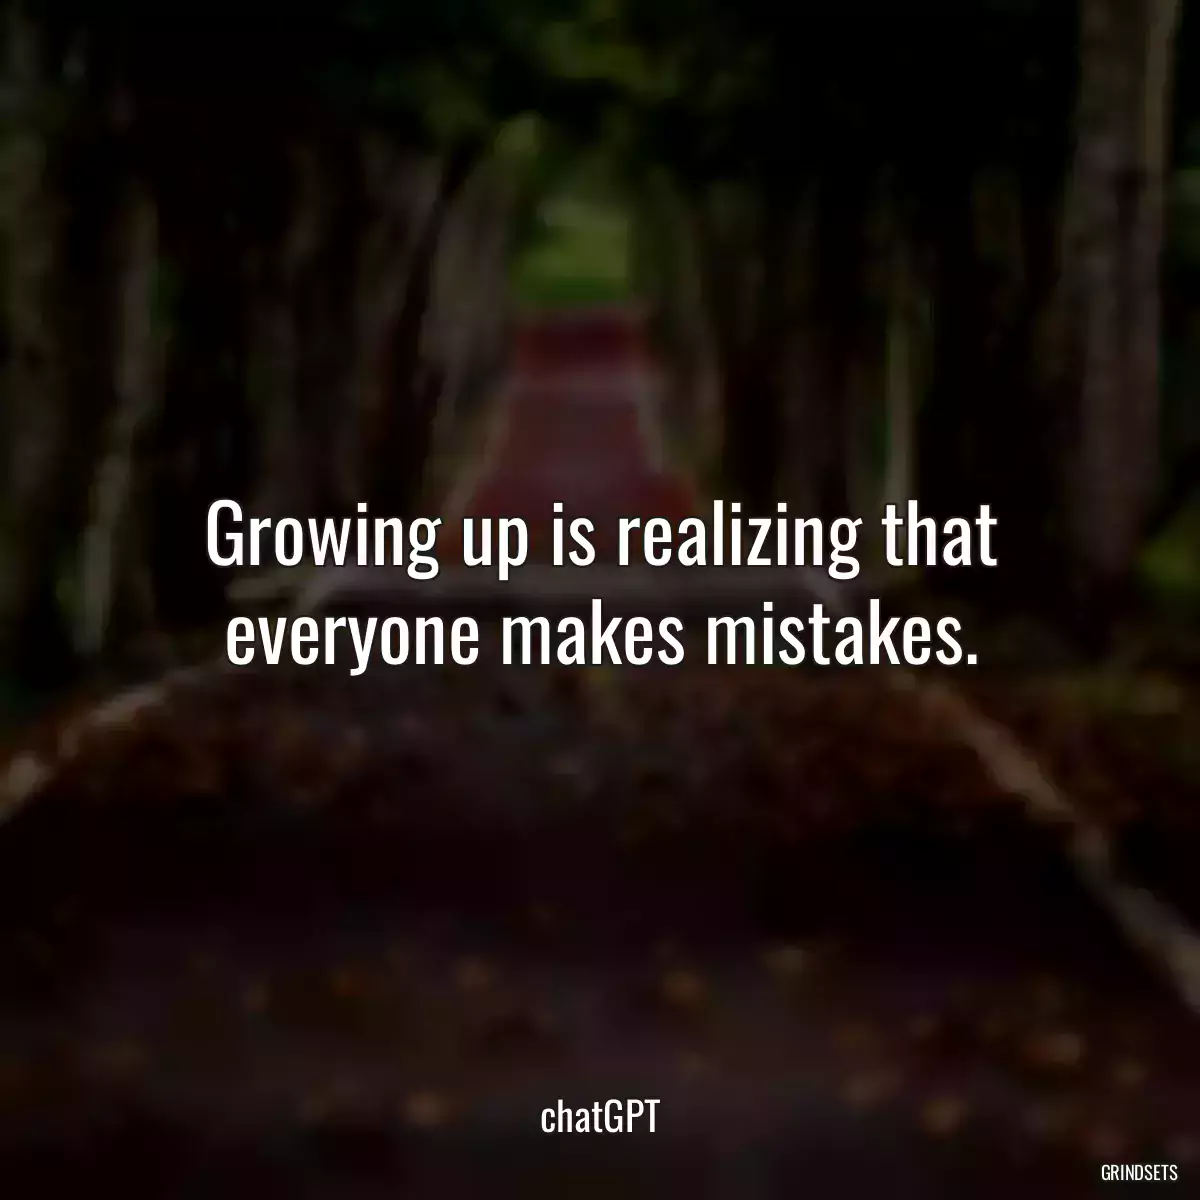 Growing up is realizing that everyone makes mistakes.